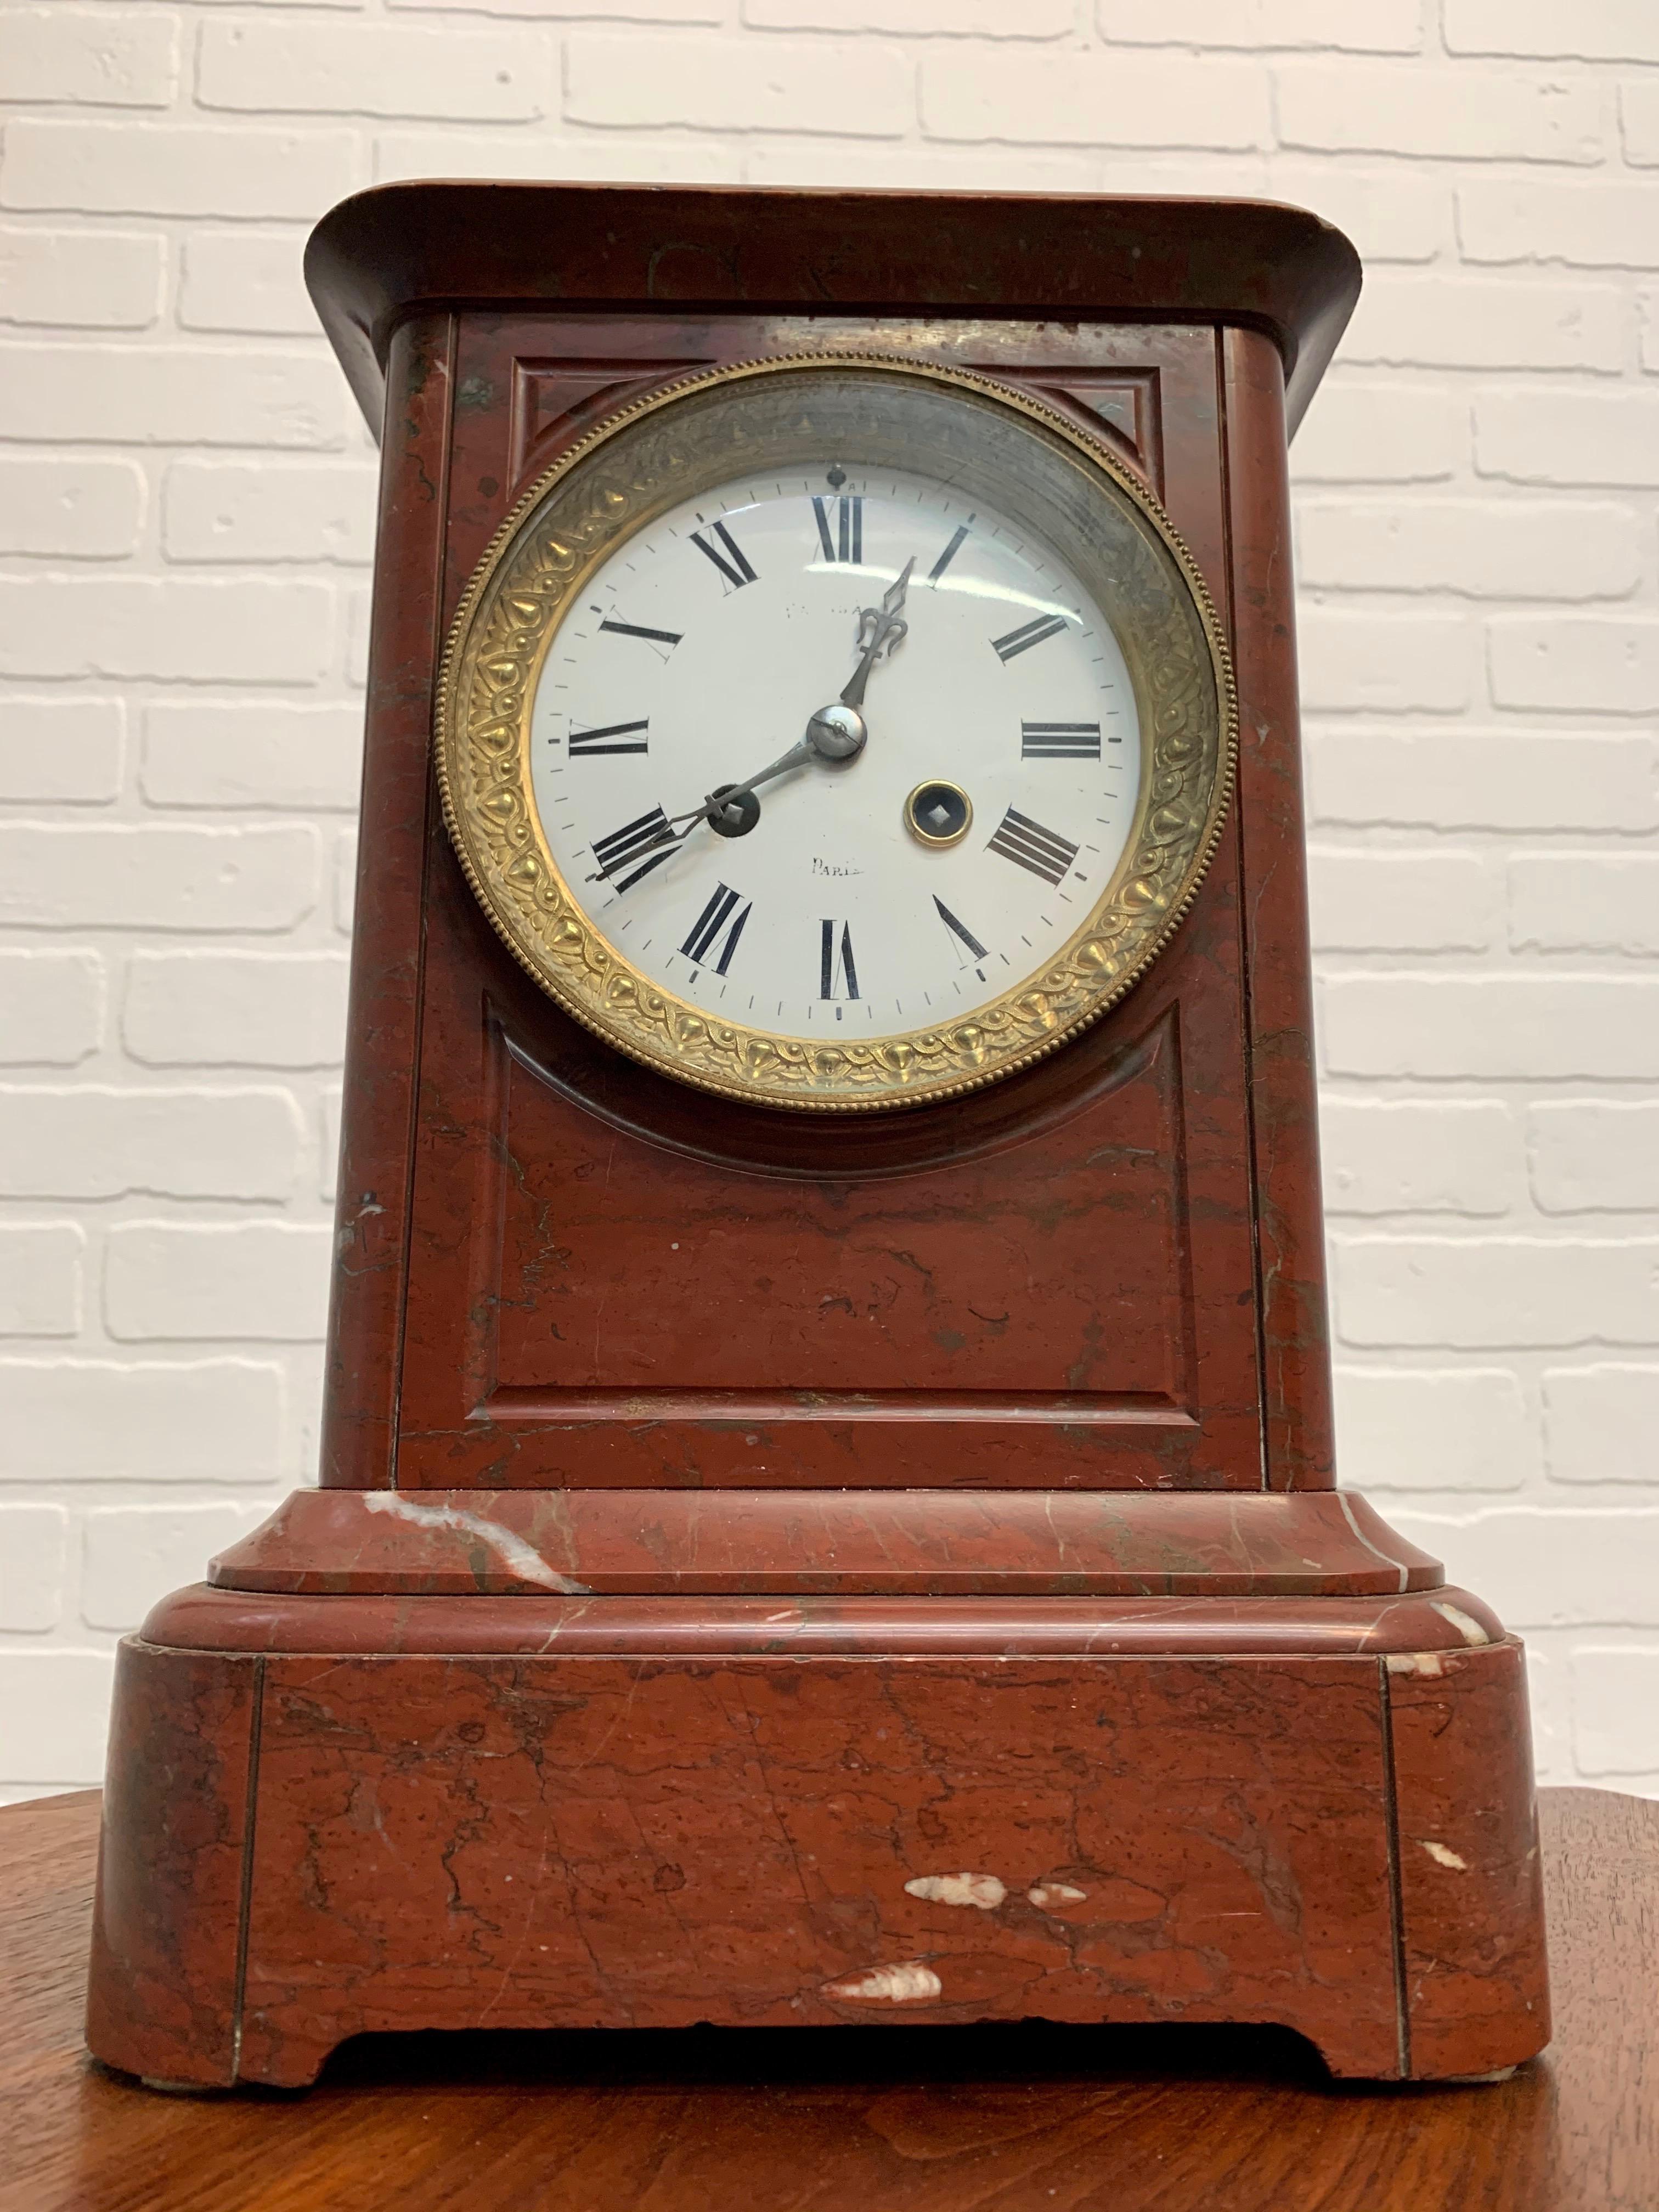 Marble architectural case with a Pomme de Paris clock movement that strikes a bell on the hour and half hour, in very good running condition.